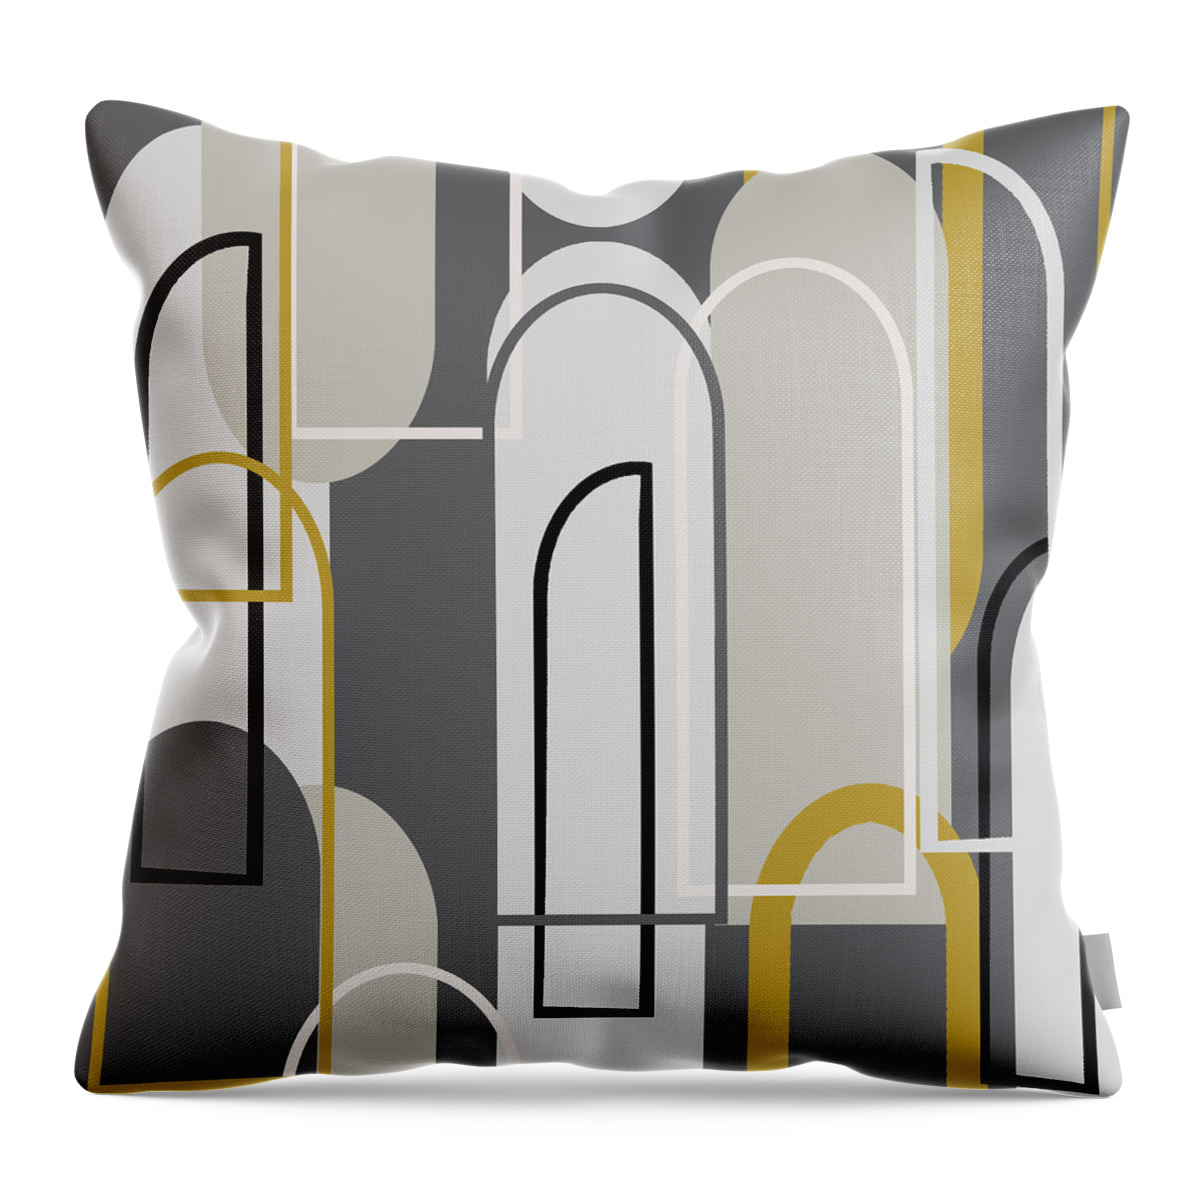 Arch Throw Pillow featuring the digital art Art Deco Arch Window Pattern 3500x3500 seamless repeat by Sand And Chi